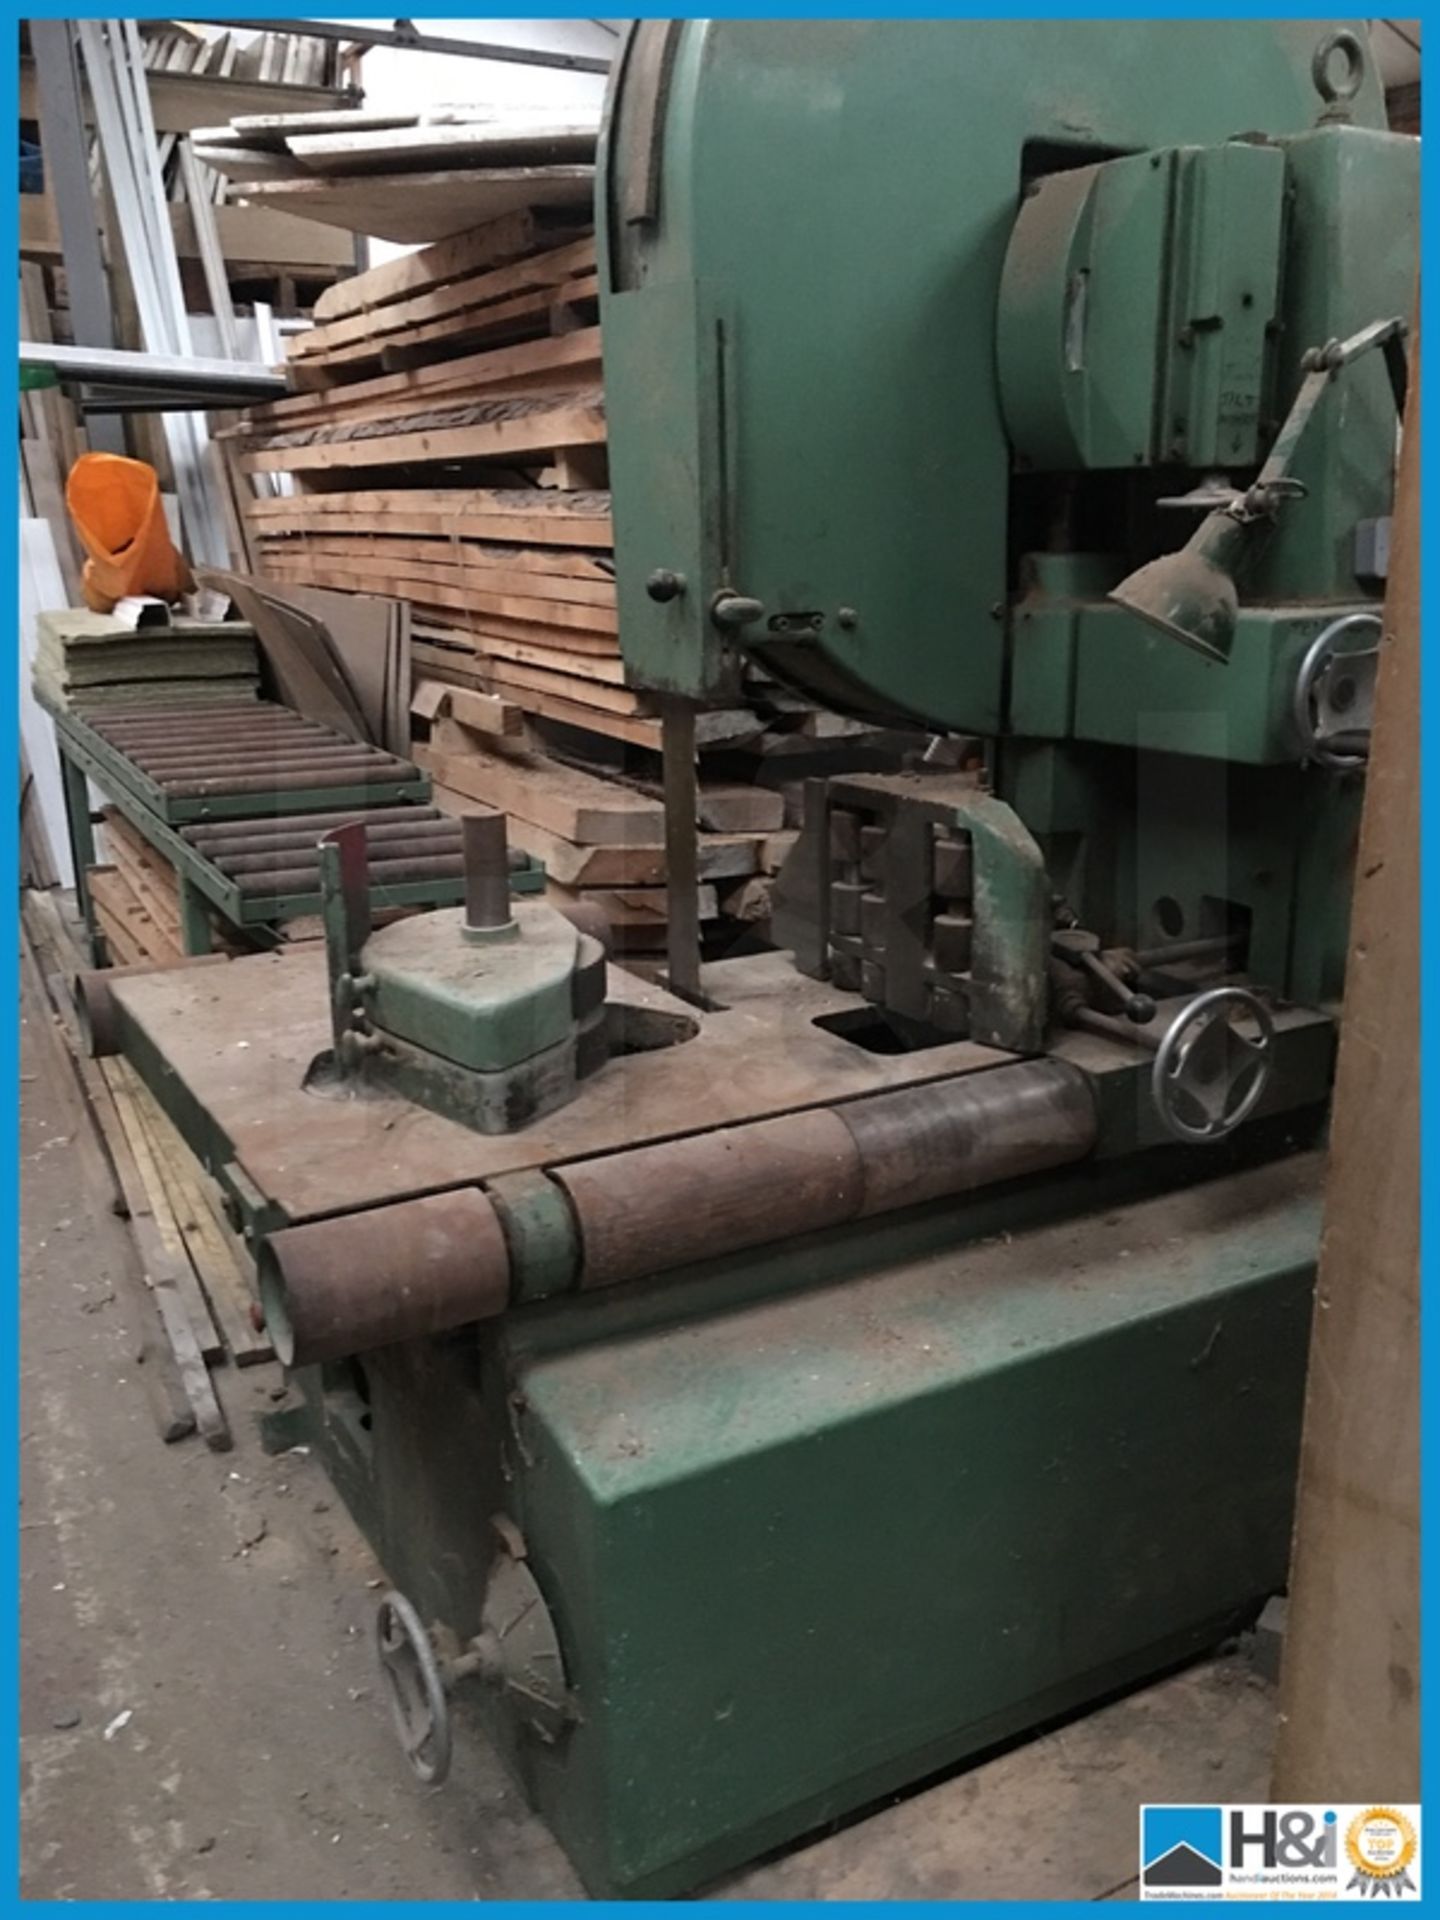 Robinson Band re saw with roller tables Appraisal: Viewing essential. Advised in working order